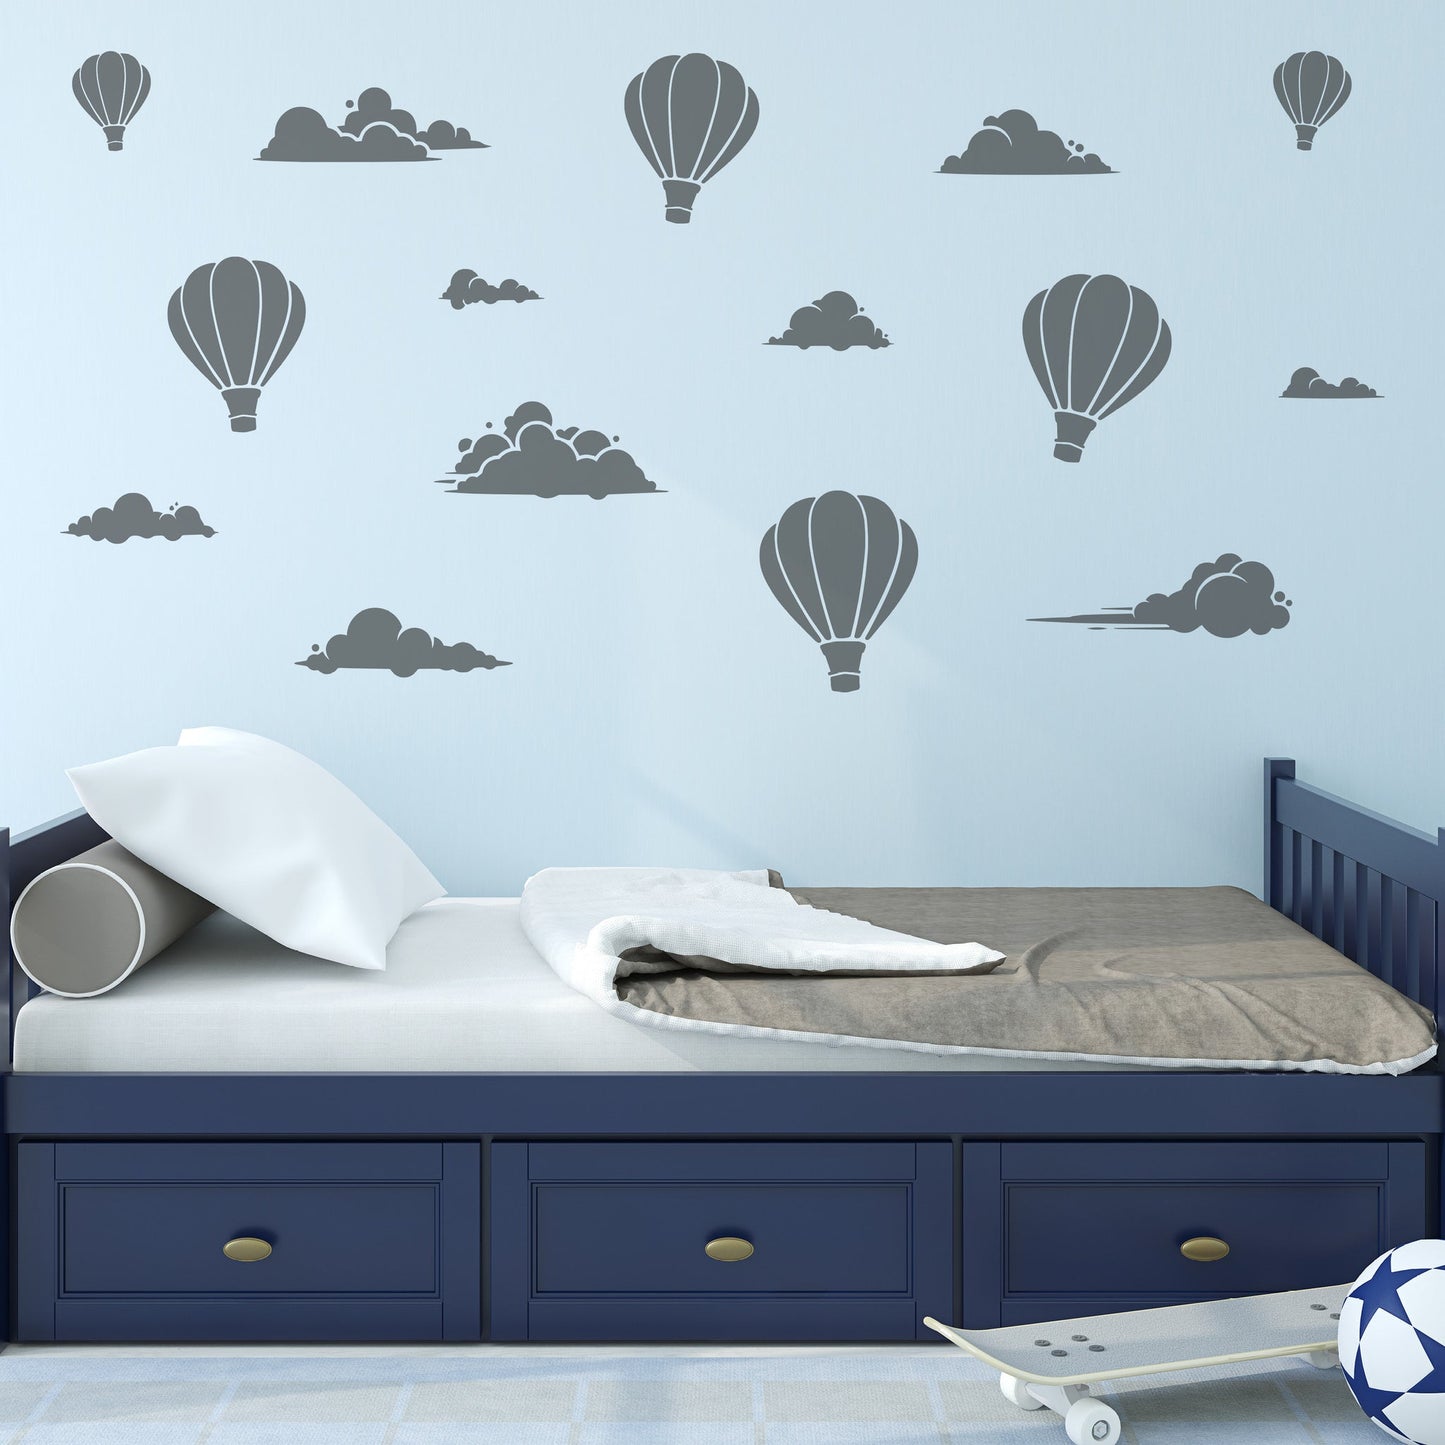 Balloons & Cloud Theme - Wall Decal Sticker Pack - Image 2